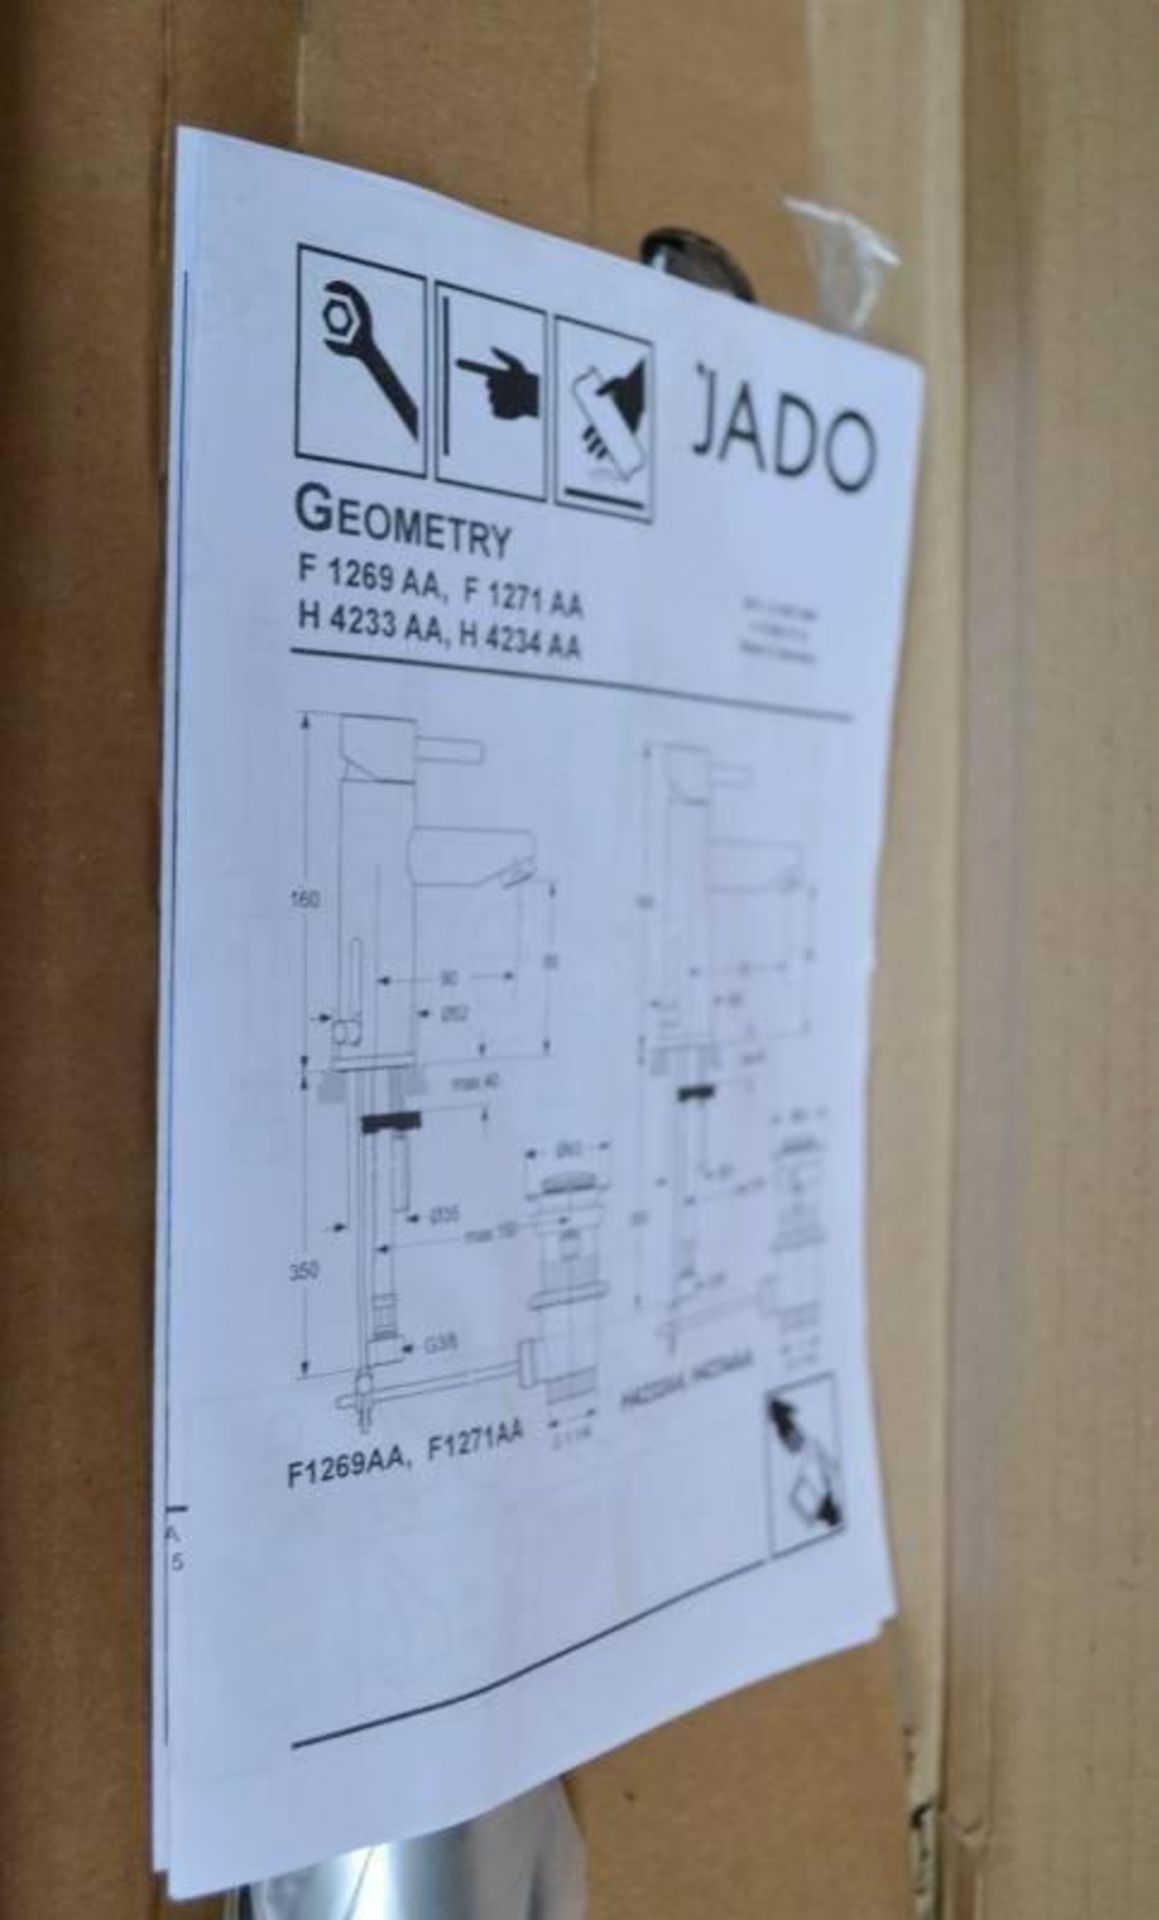 1 x Ideal Standard JADO "Geometry" Single Lever Deck-Mounted Basin Mixer Without Waste Set (F1271AA) - Image 2 of 8